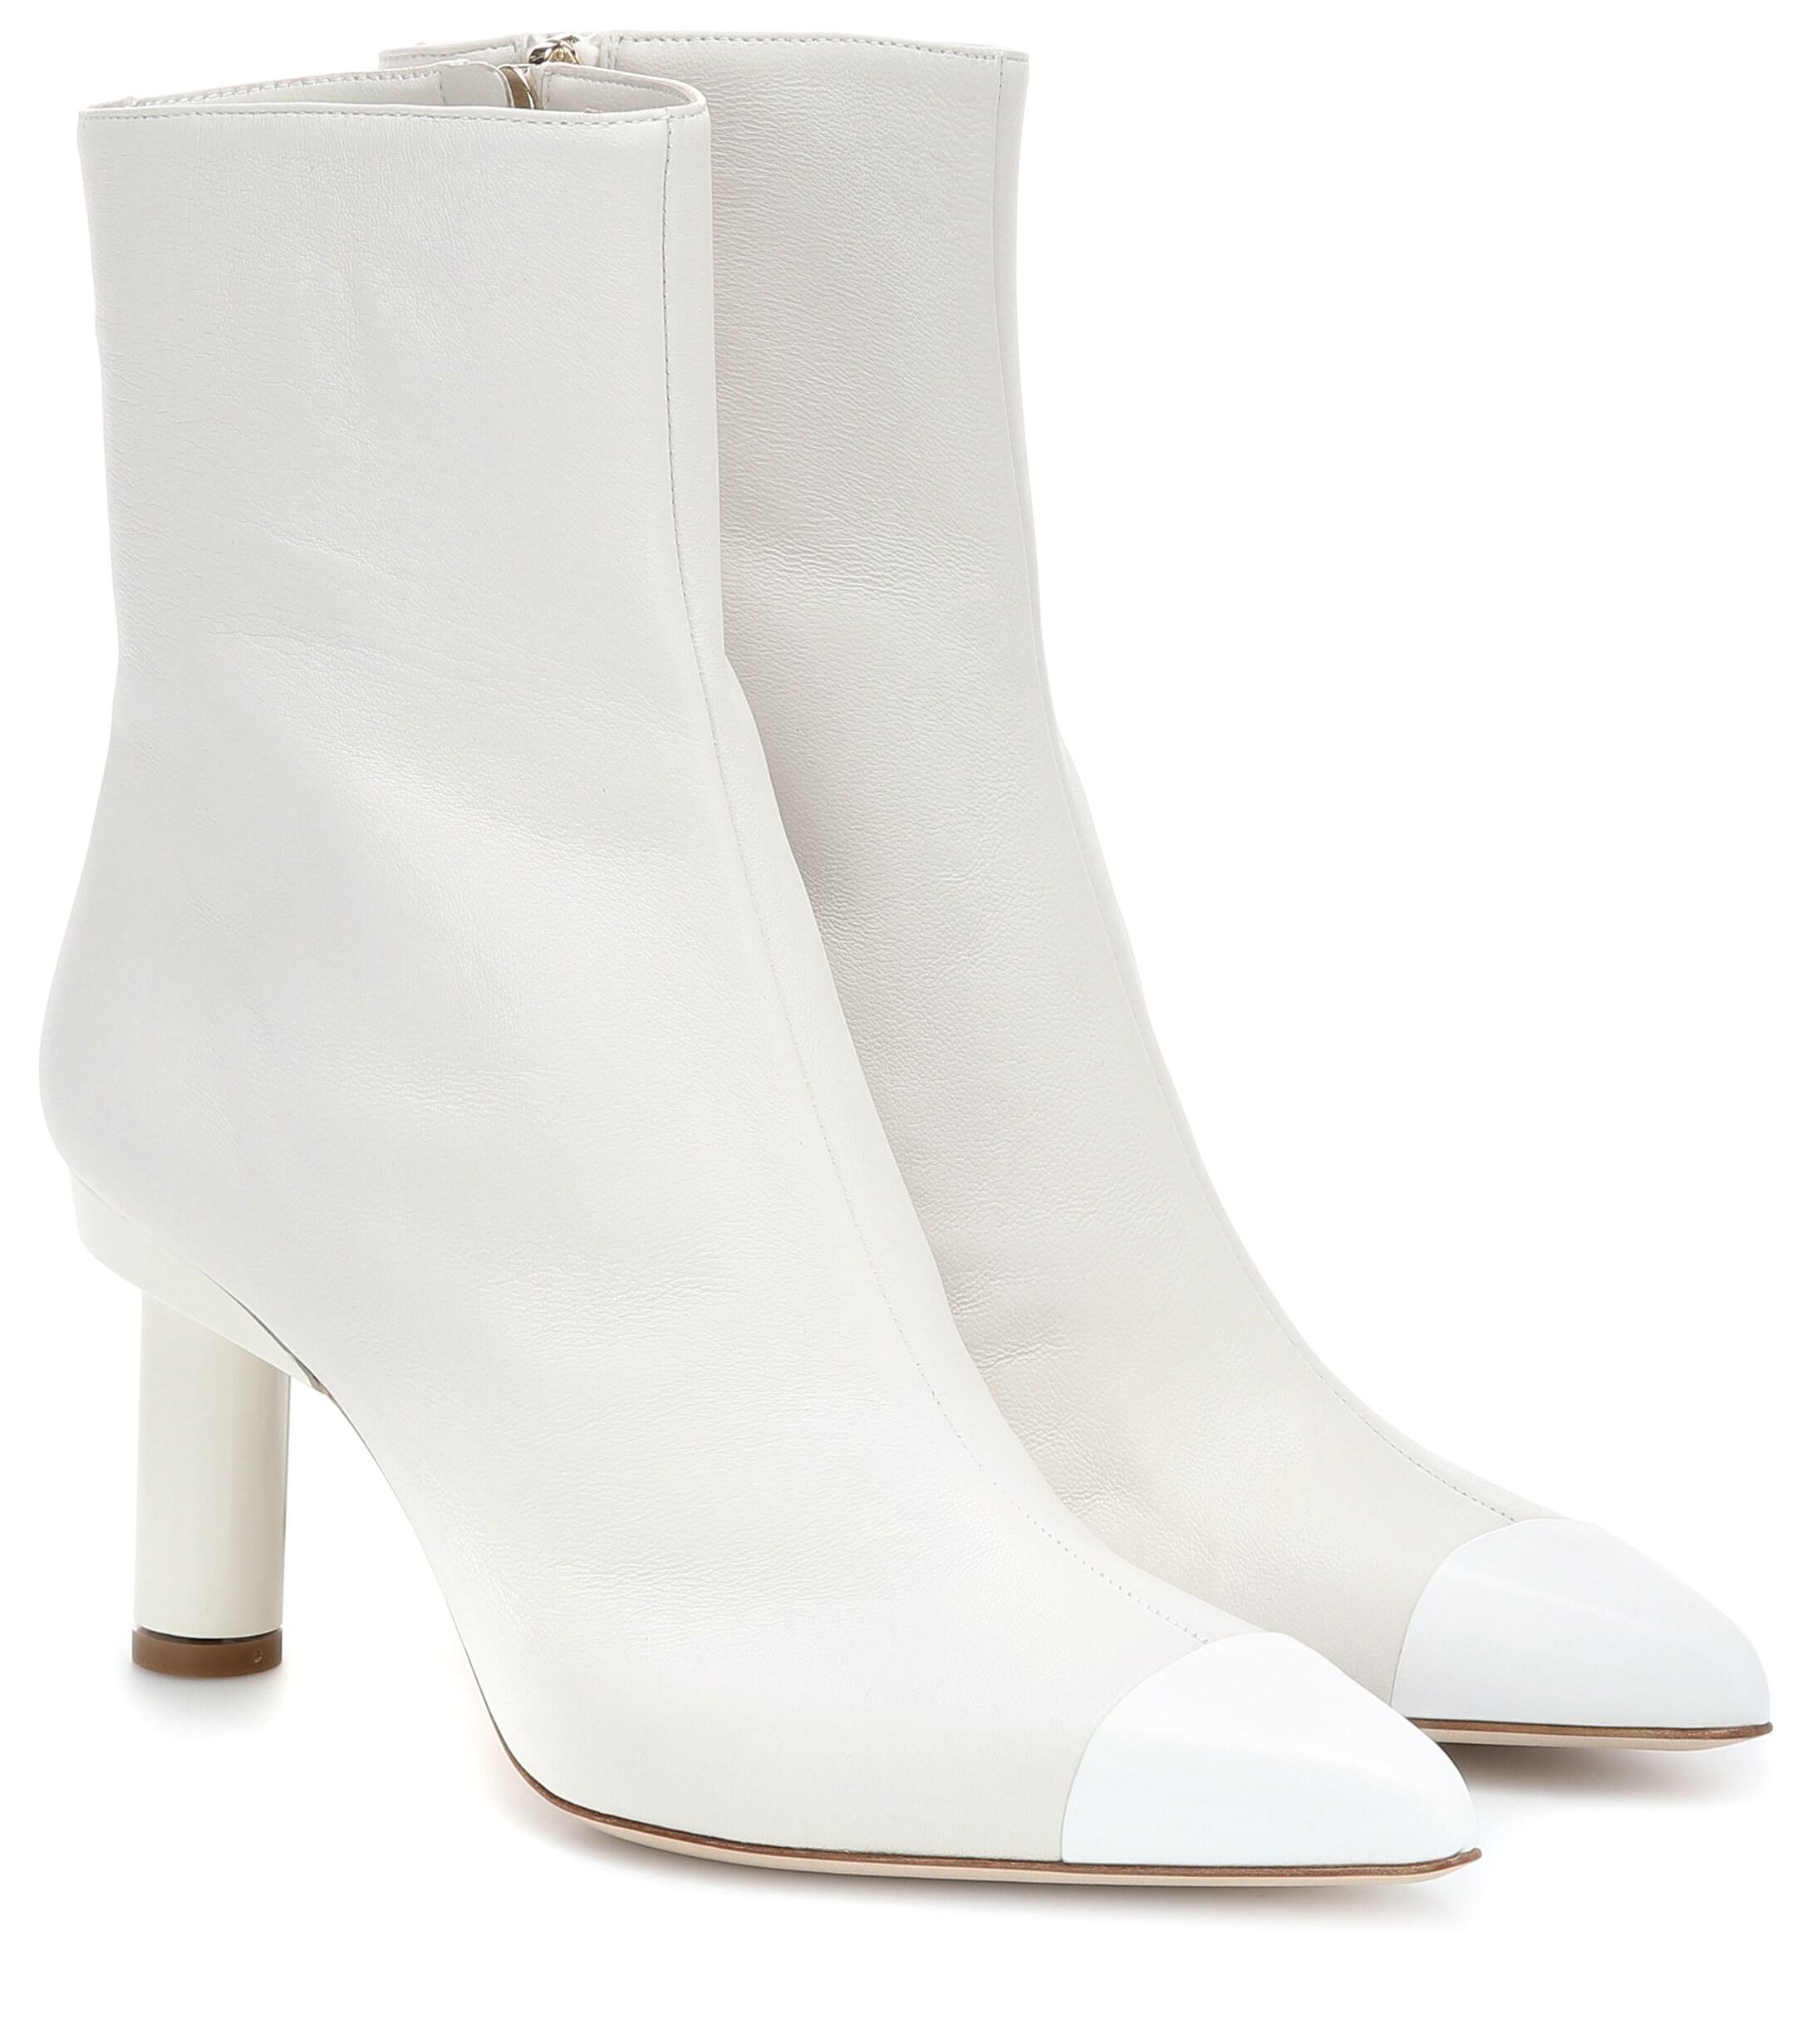 Tibi Grant Leather Ankle Boots in White - Save 30% - Lyst